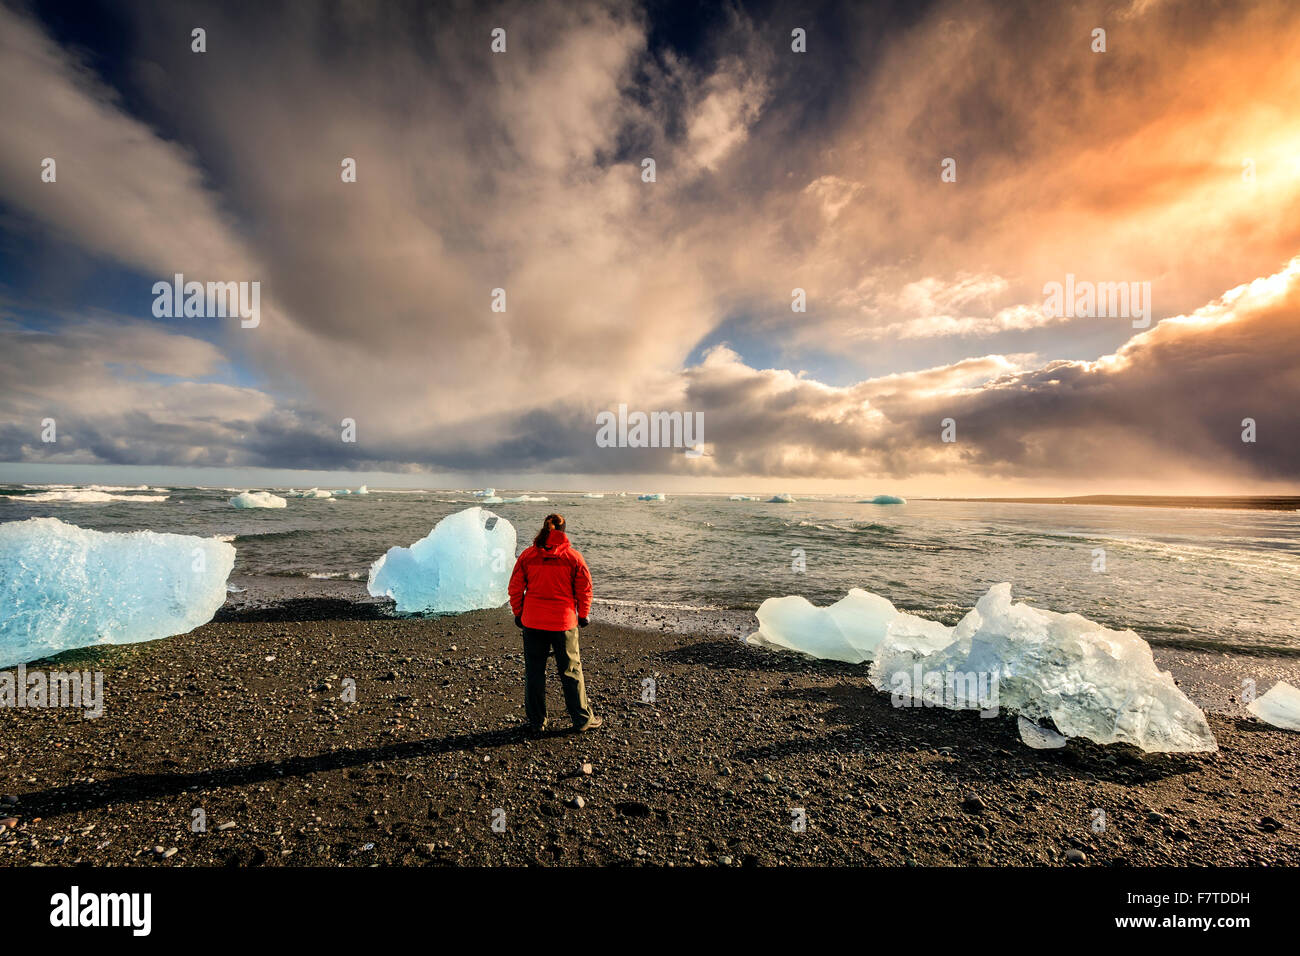 Tourist standing among ice pieces on a beach in southern Iceland Stock Photo